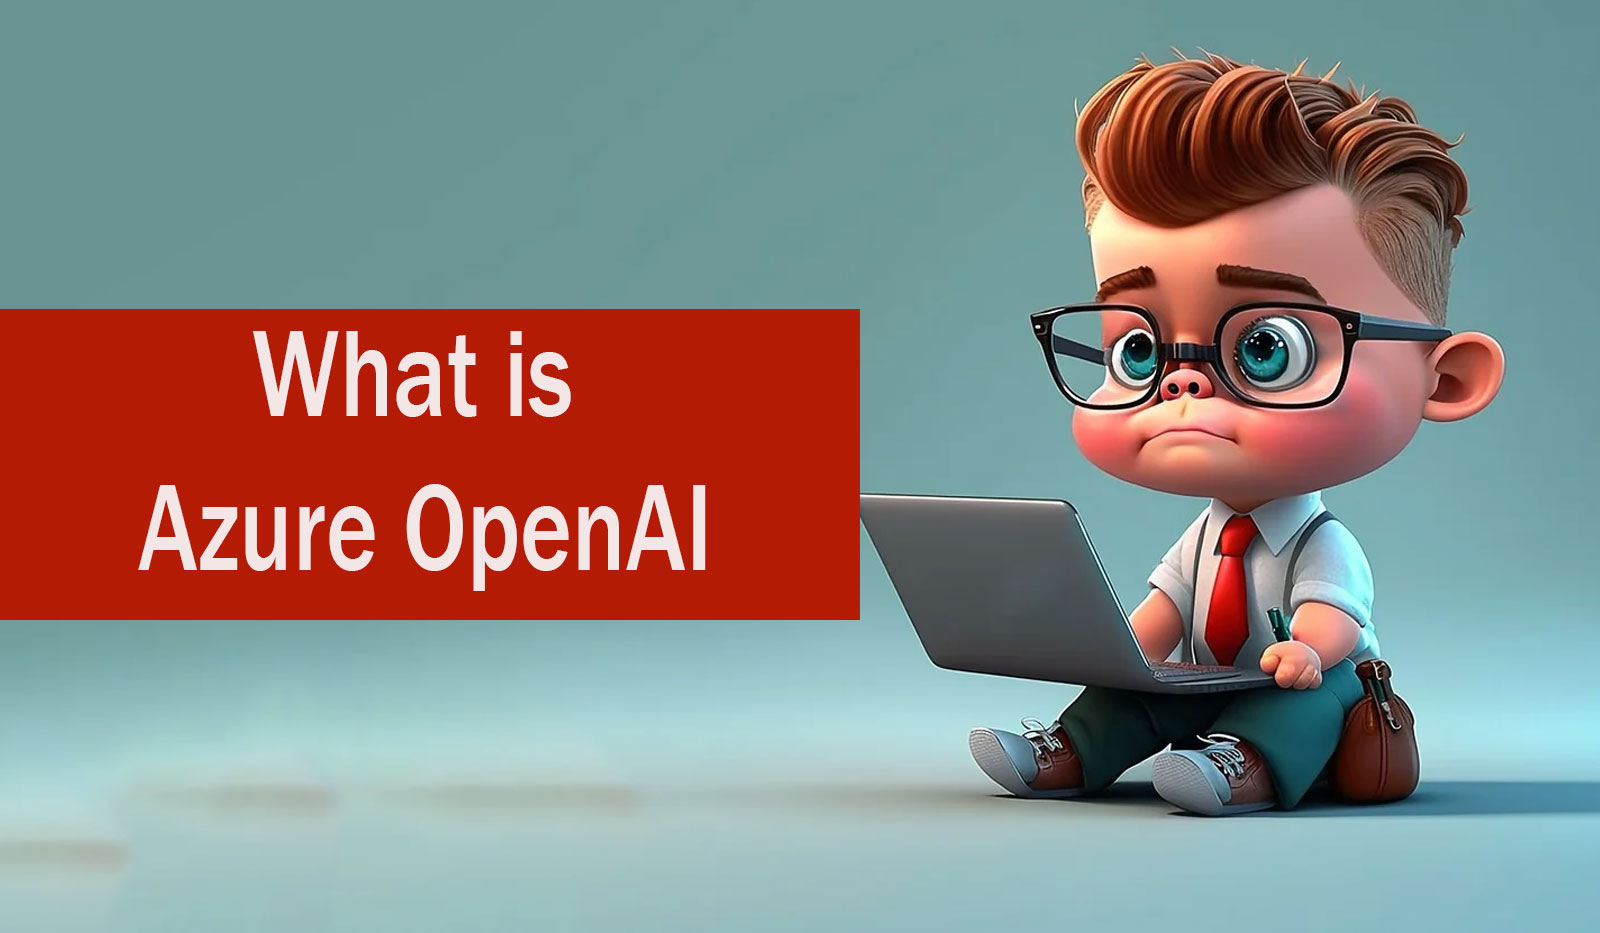 What is Azure OpenAI